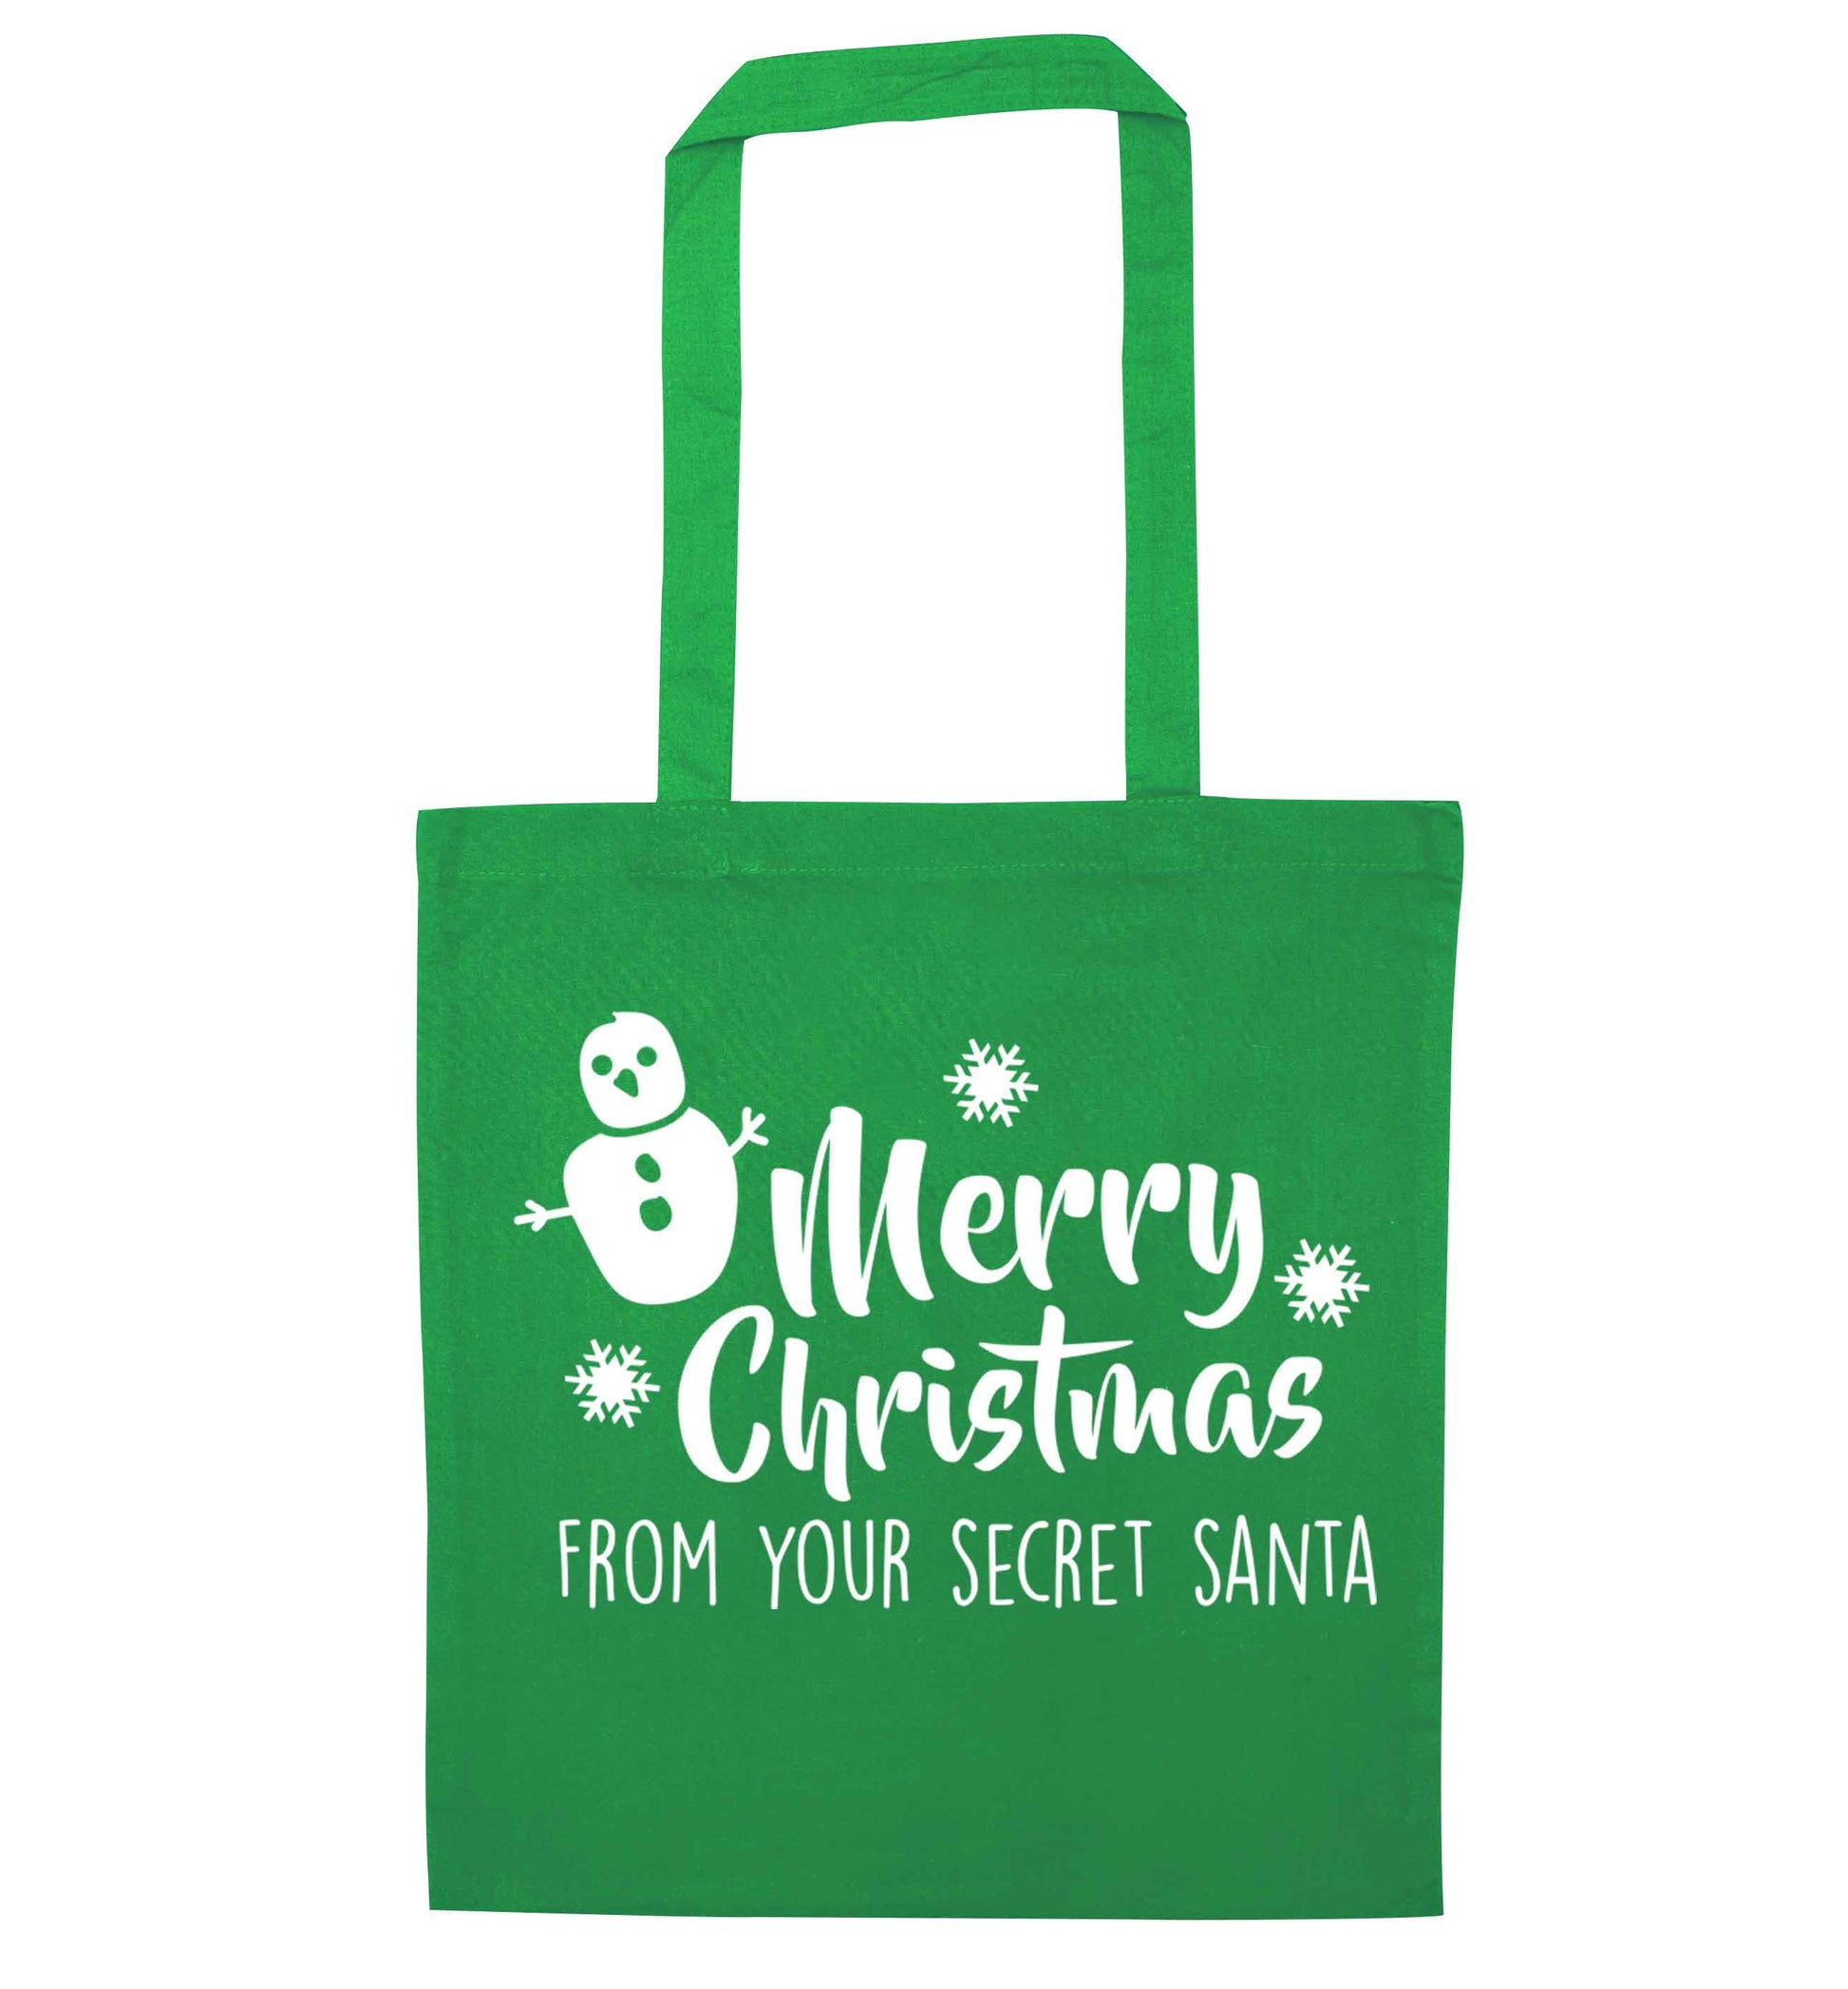 Merry Christmas from your secret Santa green tote bag